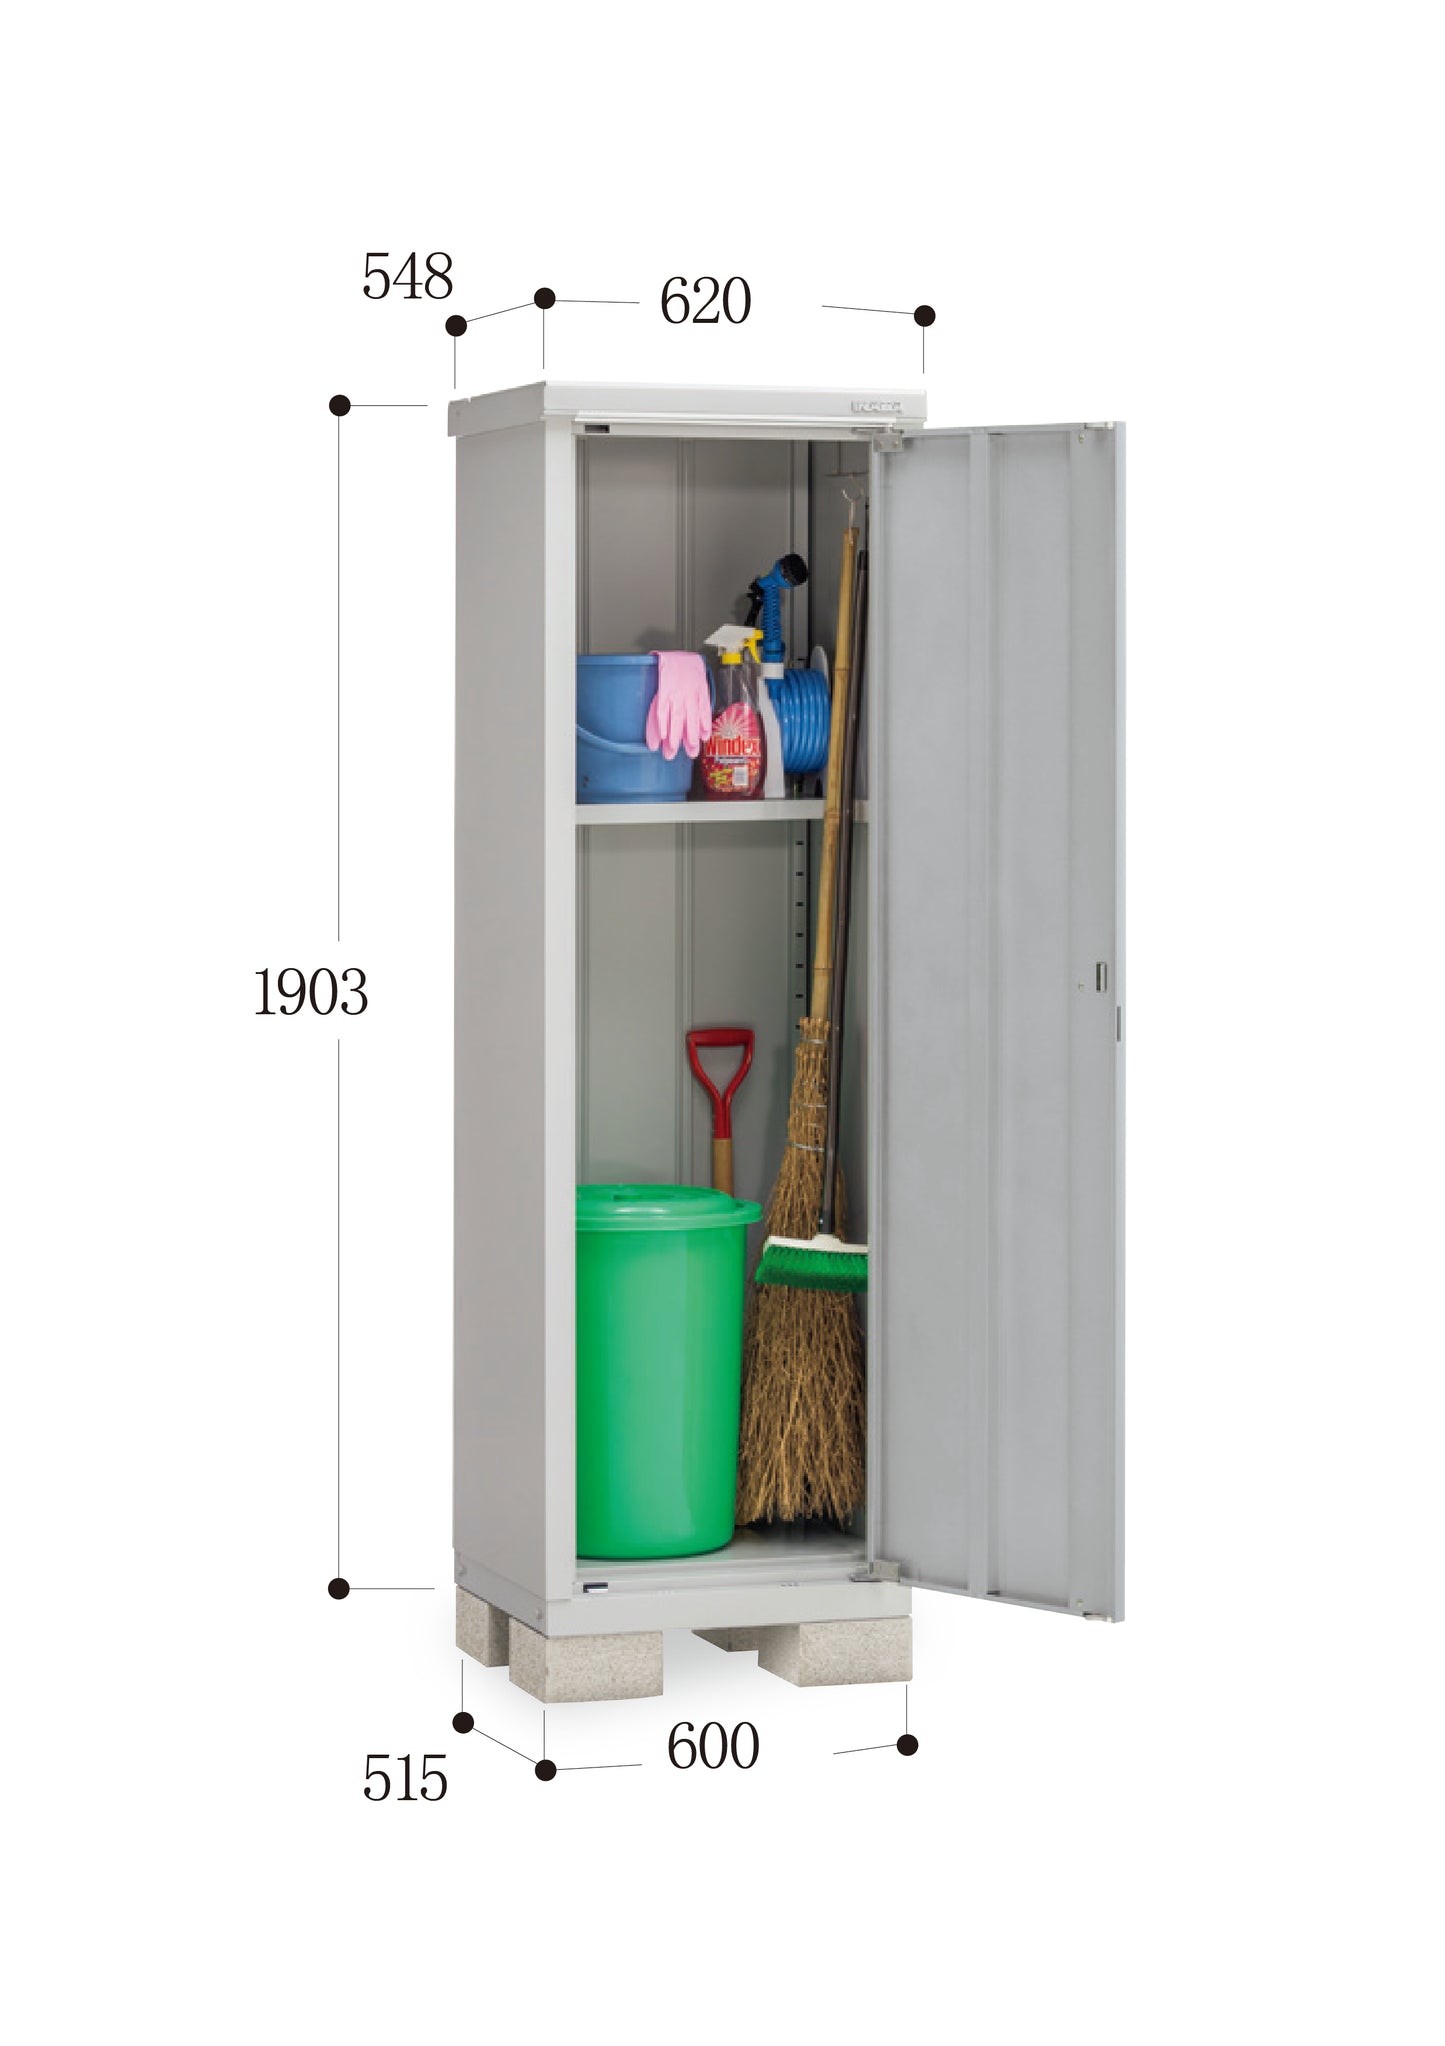 *Pre-order* Inaba Outdoor Storage BJX-065EP (W620XD548XH1903mm) 0.647m3